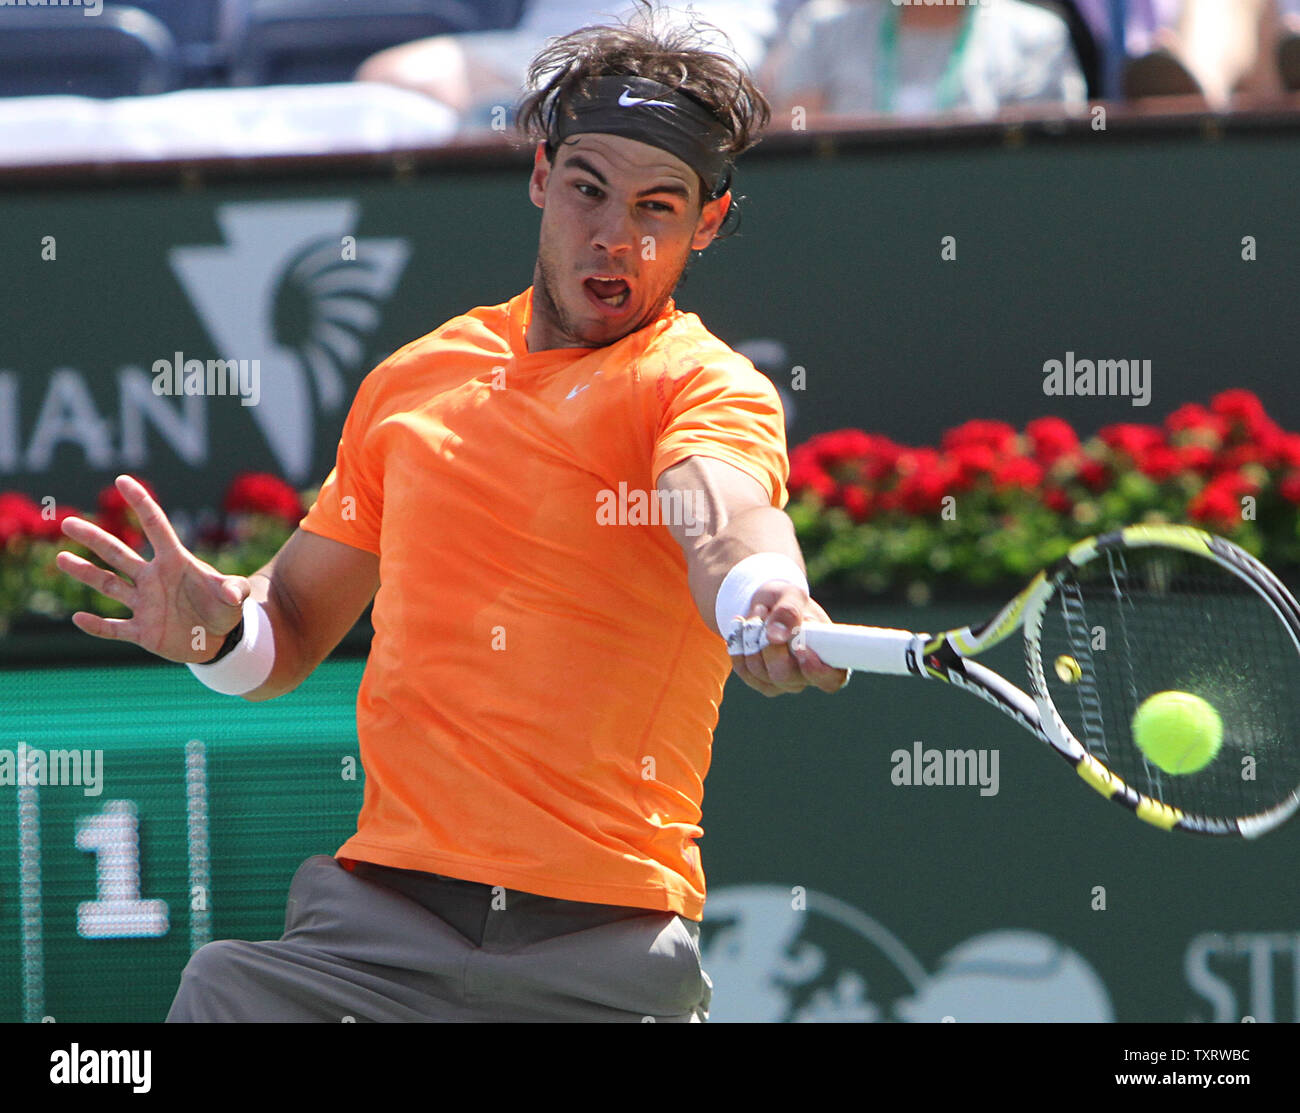 Spaniard Rafael Nadal hits a shot during his mens semi-final match against Argentine Juan Martin Del Potro at the BNP Paribas Open in Indian Wells, California on March 19, 2011.  Nadal defeated Del Potro 6-4, 6-4 to advance to the tournament final.   UPI/David Silpa Stock Photo